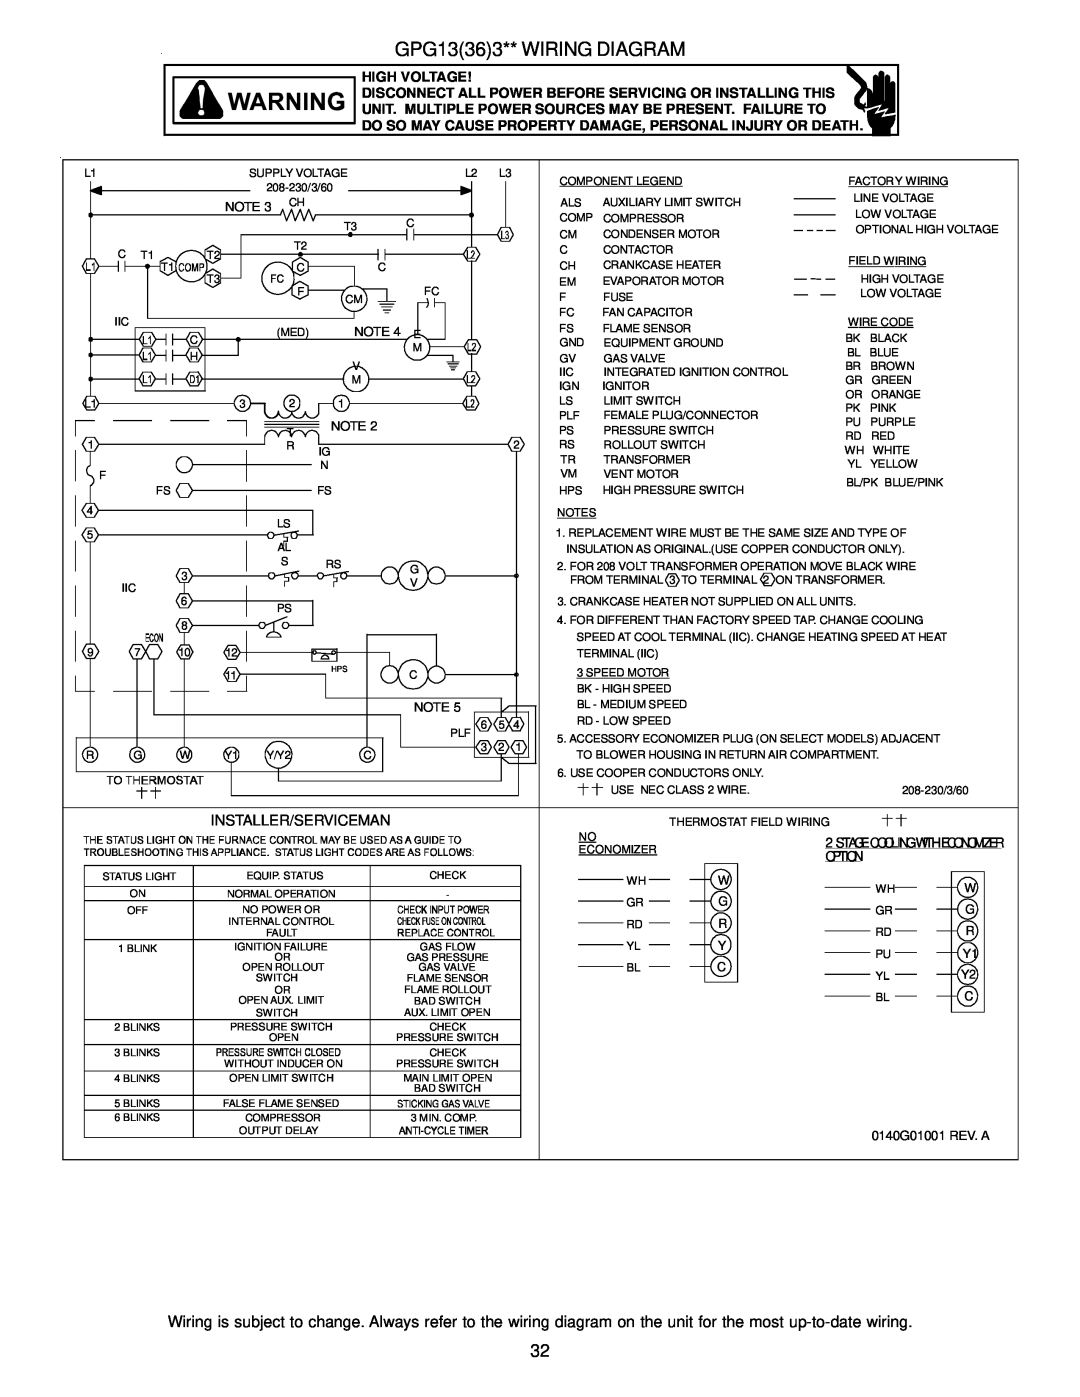 Goodman Mfg A/GPG13 M operating instructions GPG13363** WIRING DIAGRAM, NOTE 3 CH, NOTE 4 E 